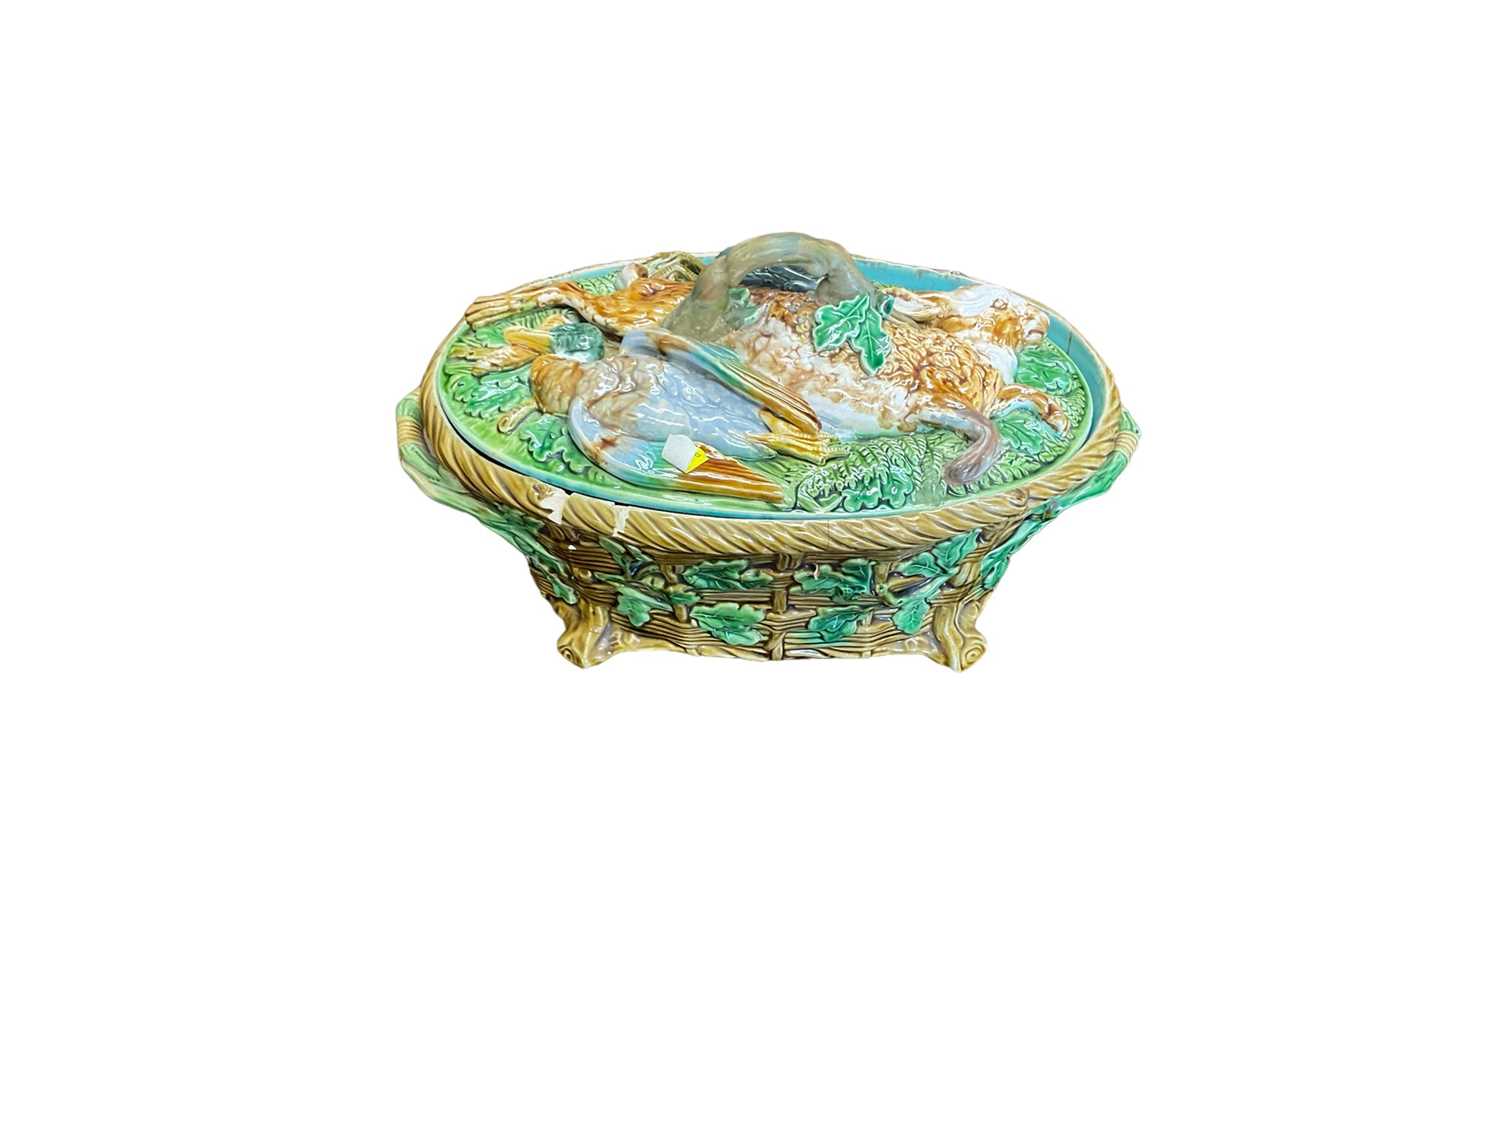 Minton style majolica game pie dish, damaged, together with Wedgwood style leaf dishes and an art de - Image 3 of 3